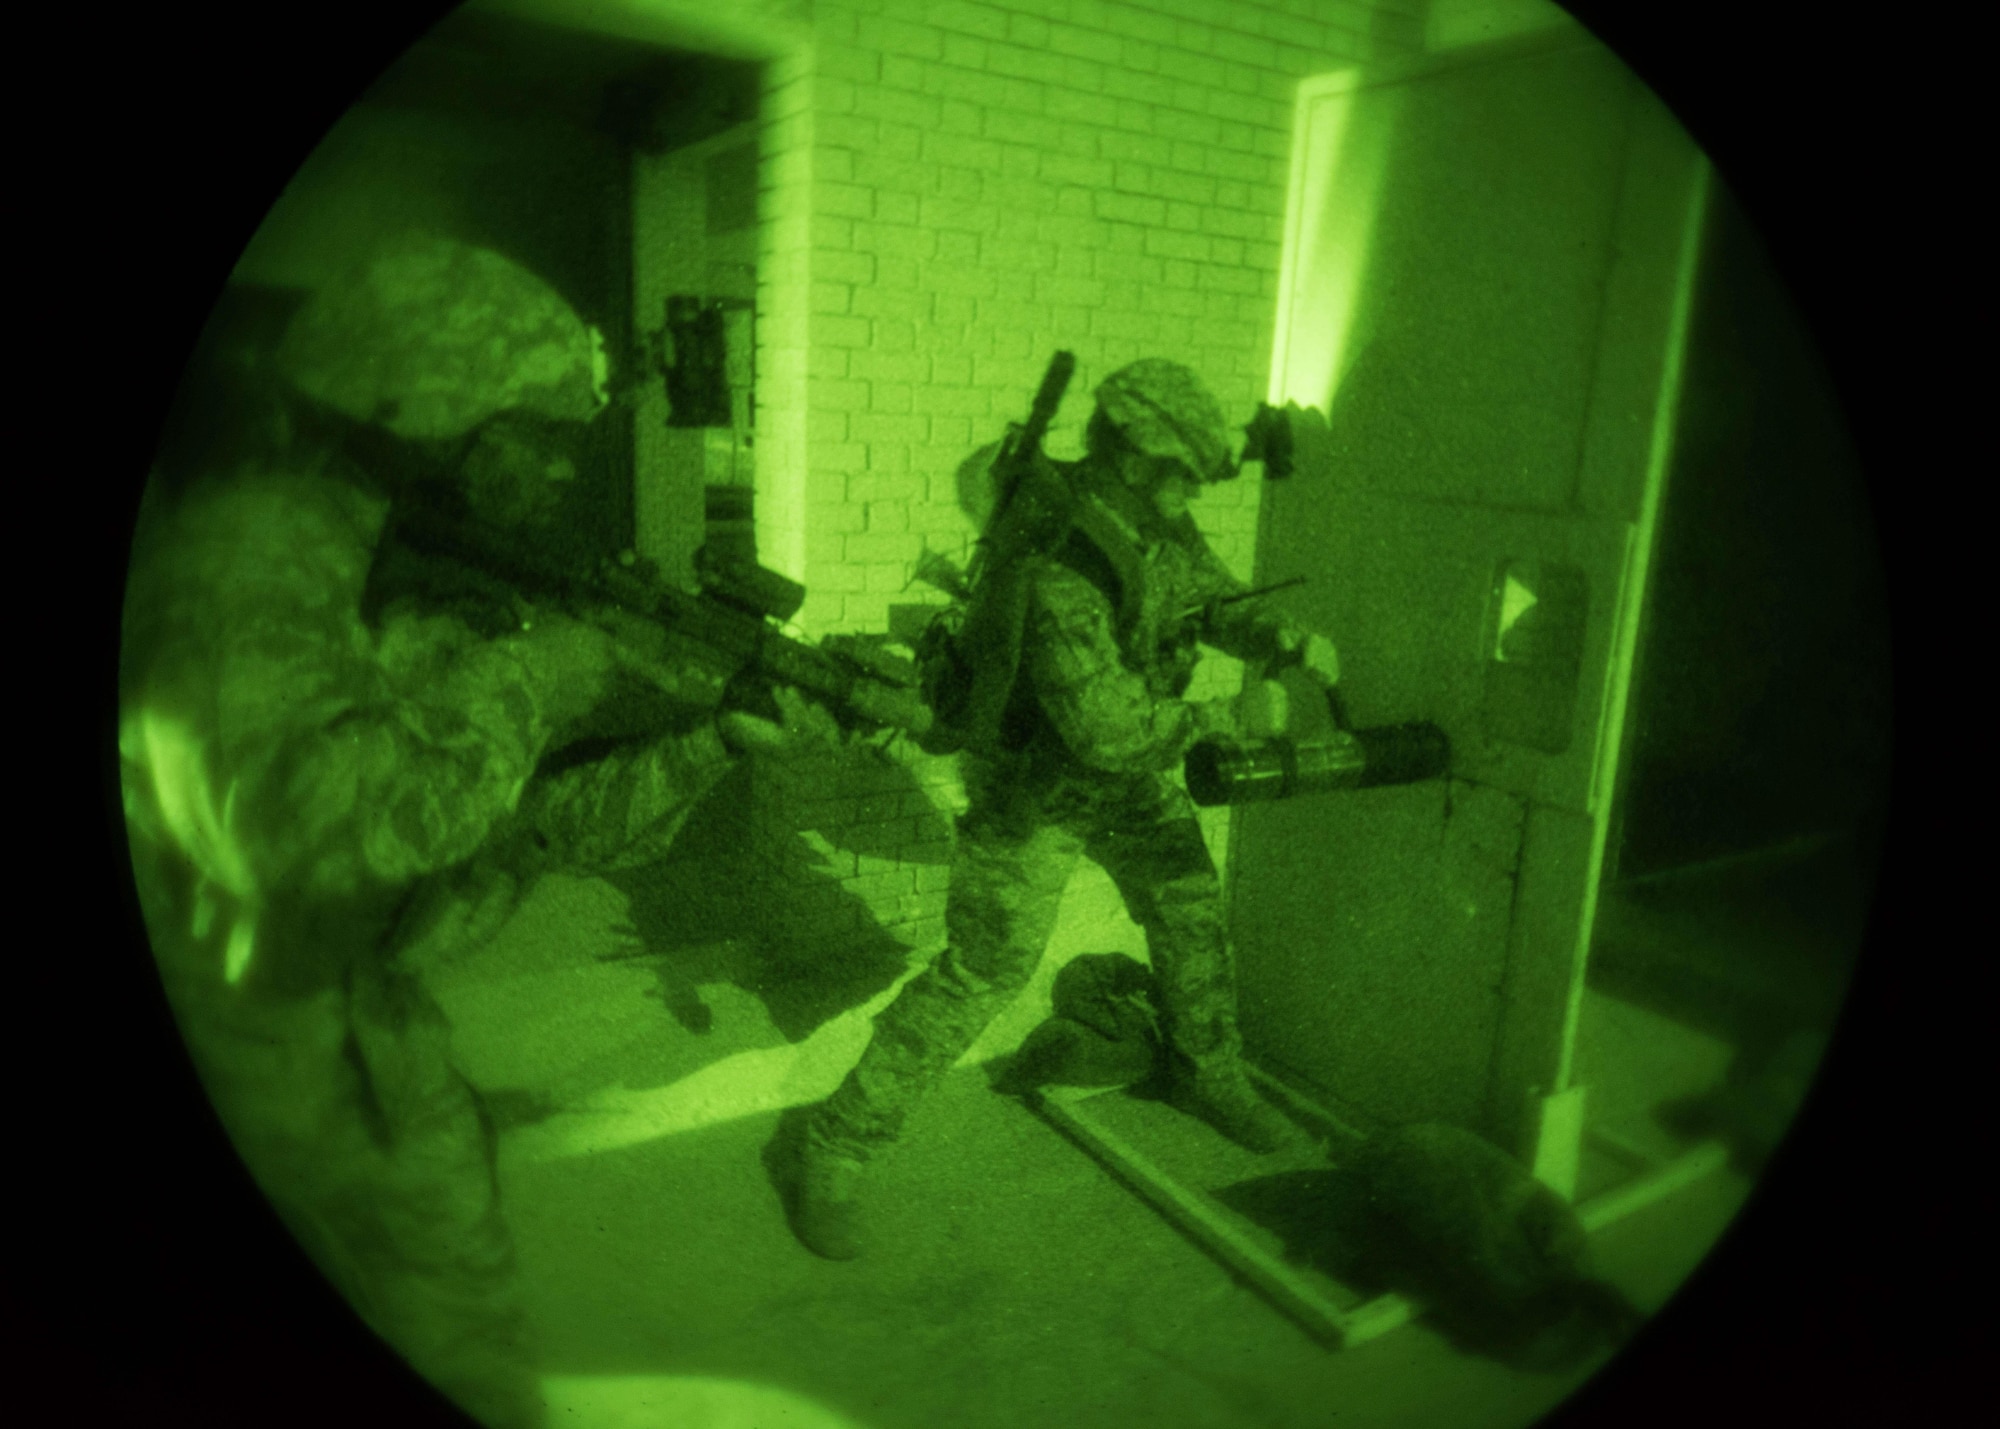 at an undisclosed location in Southwest Asia, Oct. 5, 2017. The HRRT team is a highly trained response force that trains to respond to active shooter, barricaded subjects and hostage rescue situations.